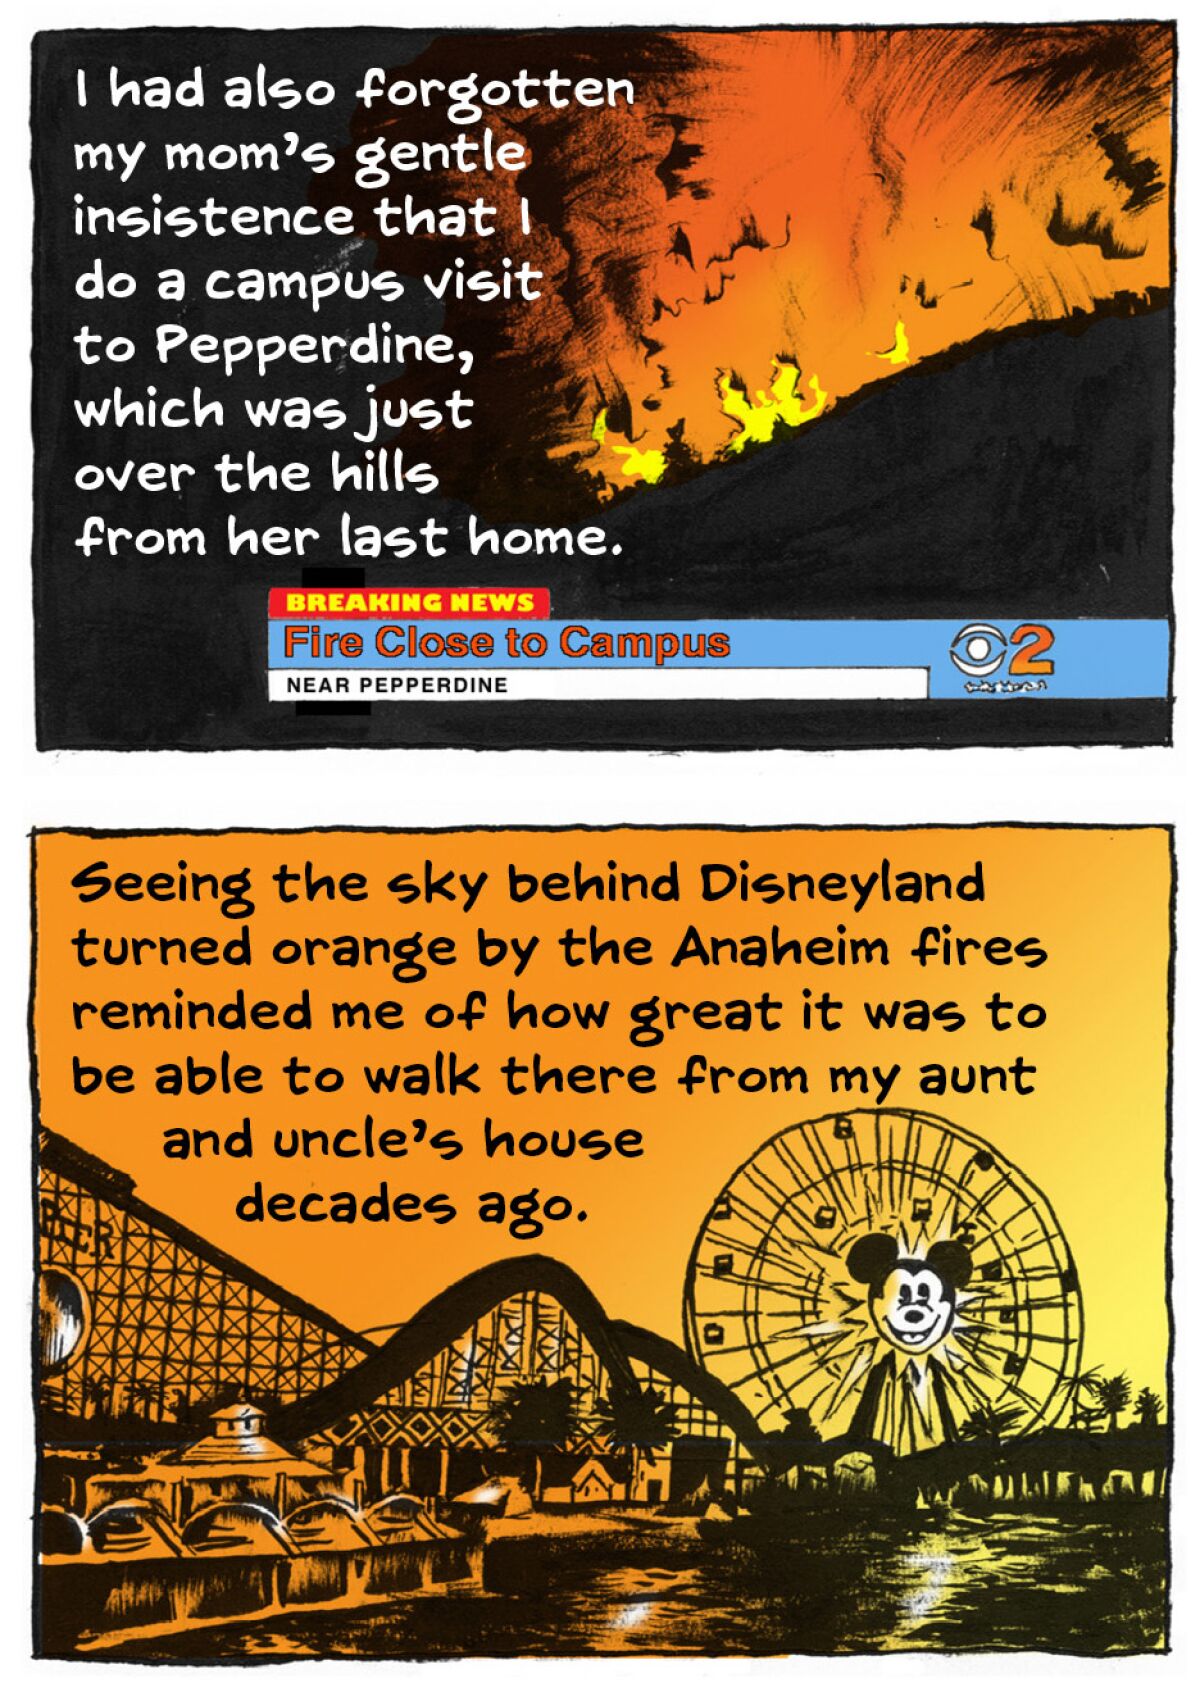 Illustrations of fire footage on TV and Disneyland against an orange sky